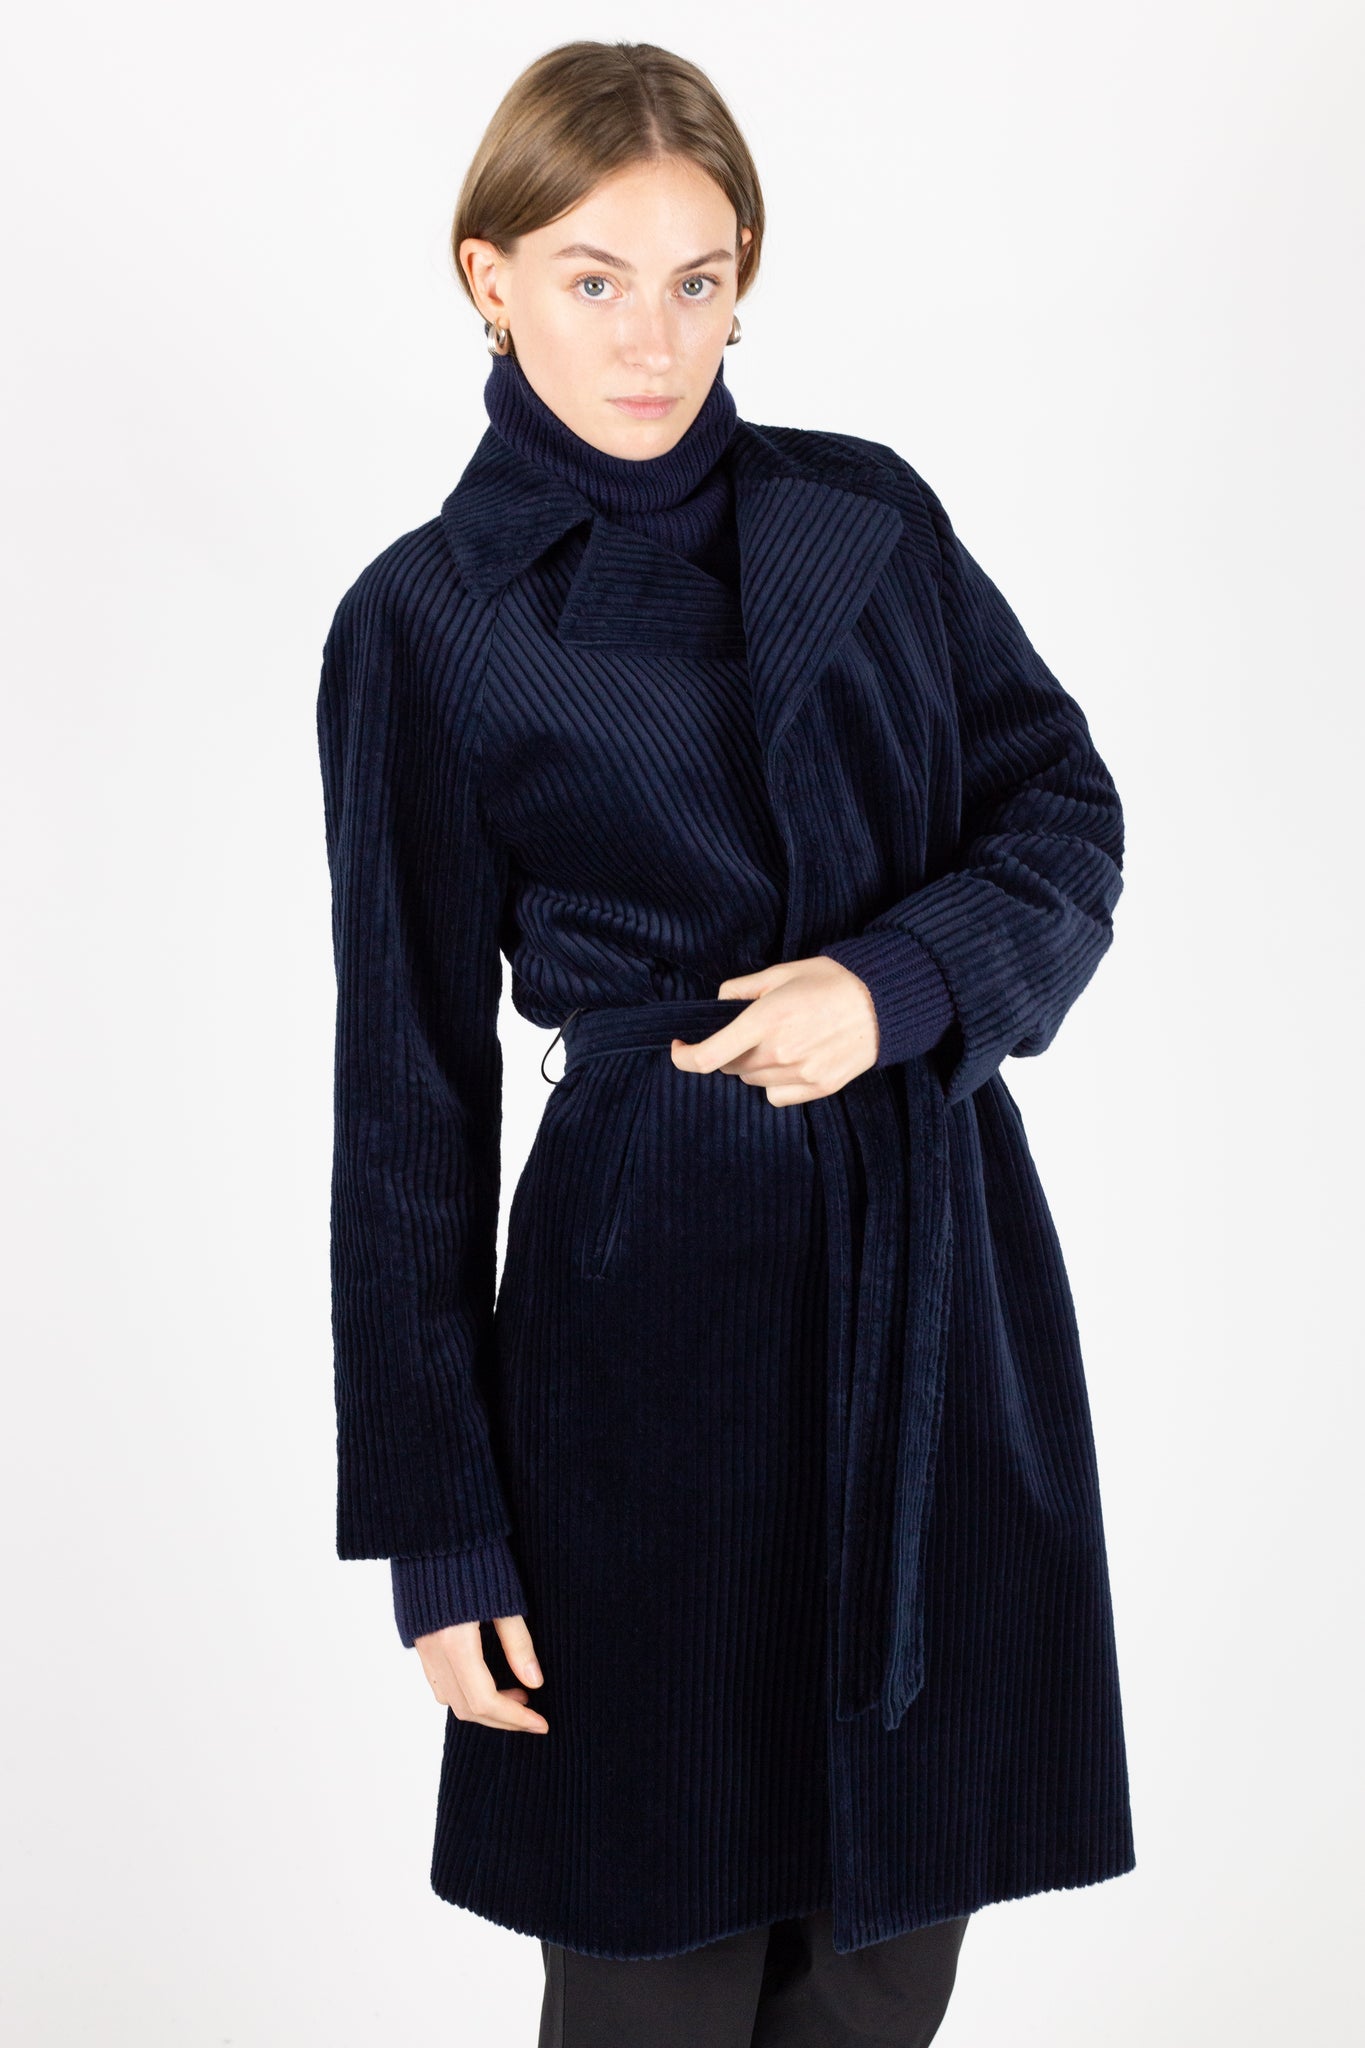 Belted cord coat in navy cord